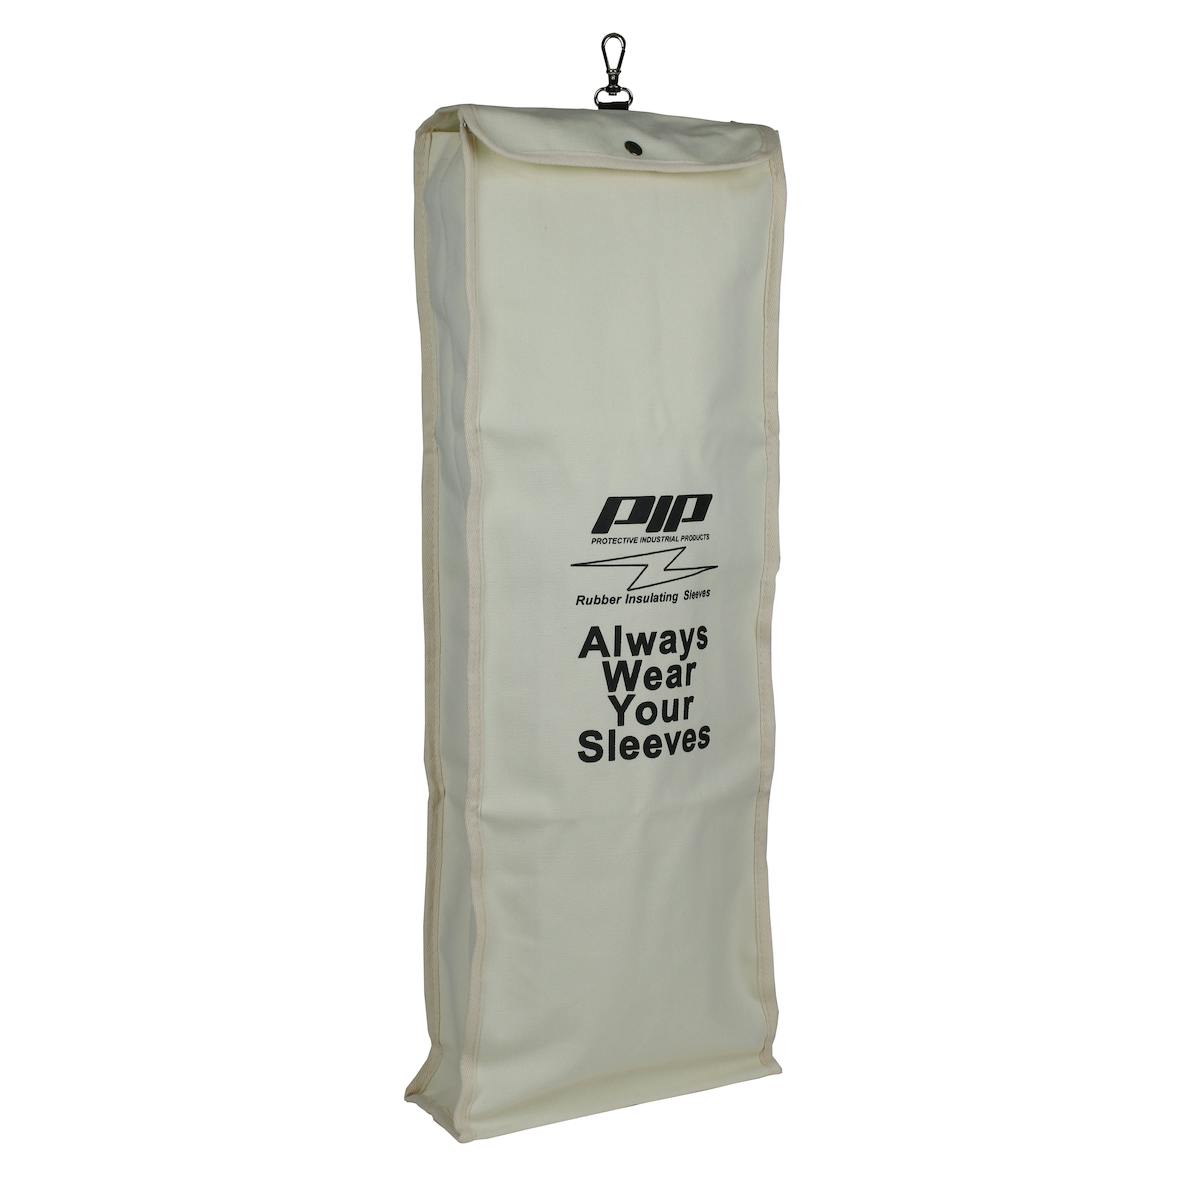 Canvas bag for 30-inch Rubber Insulating Sleeve, Natural (148-6030) - OS